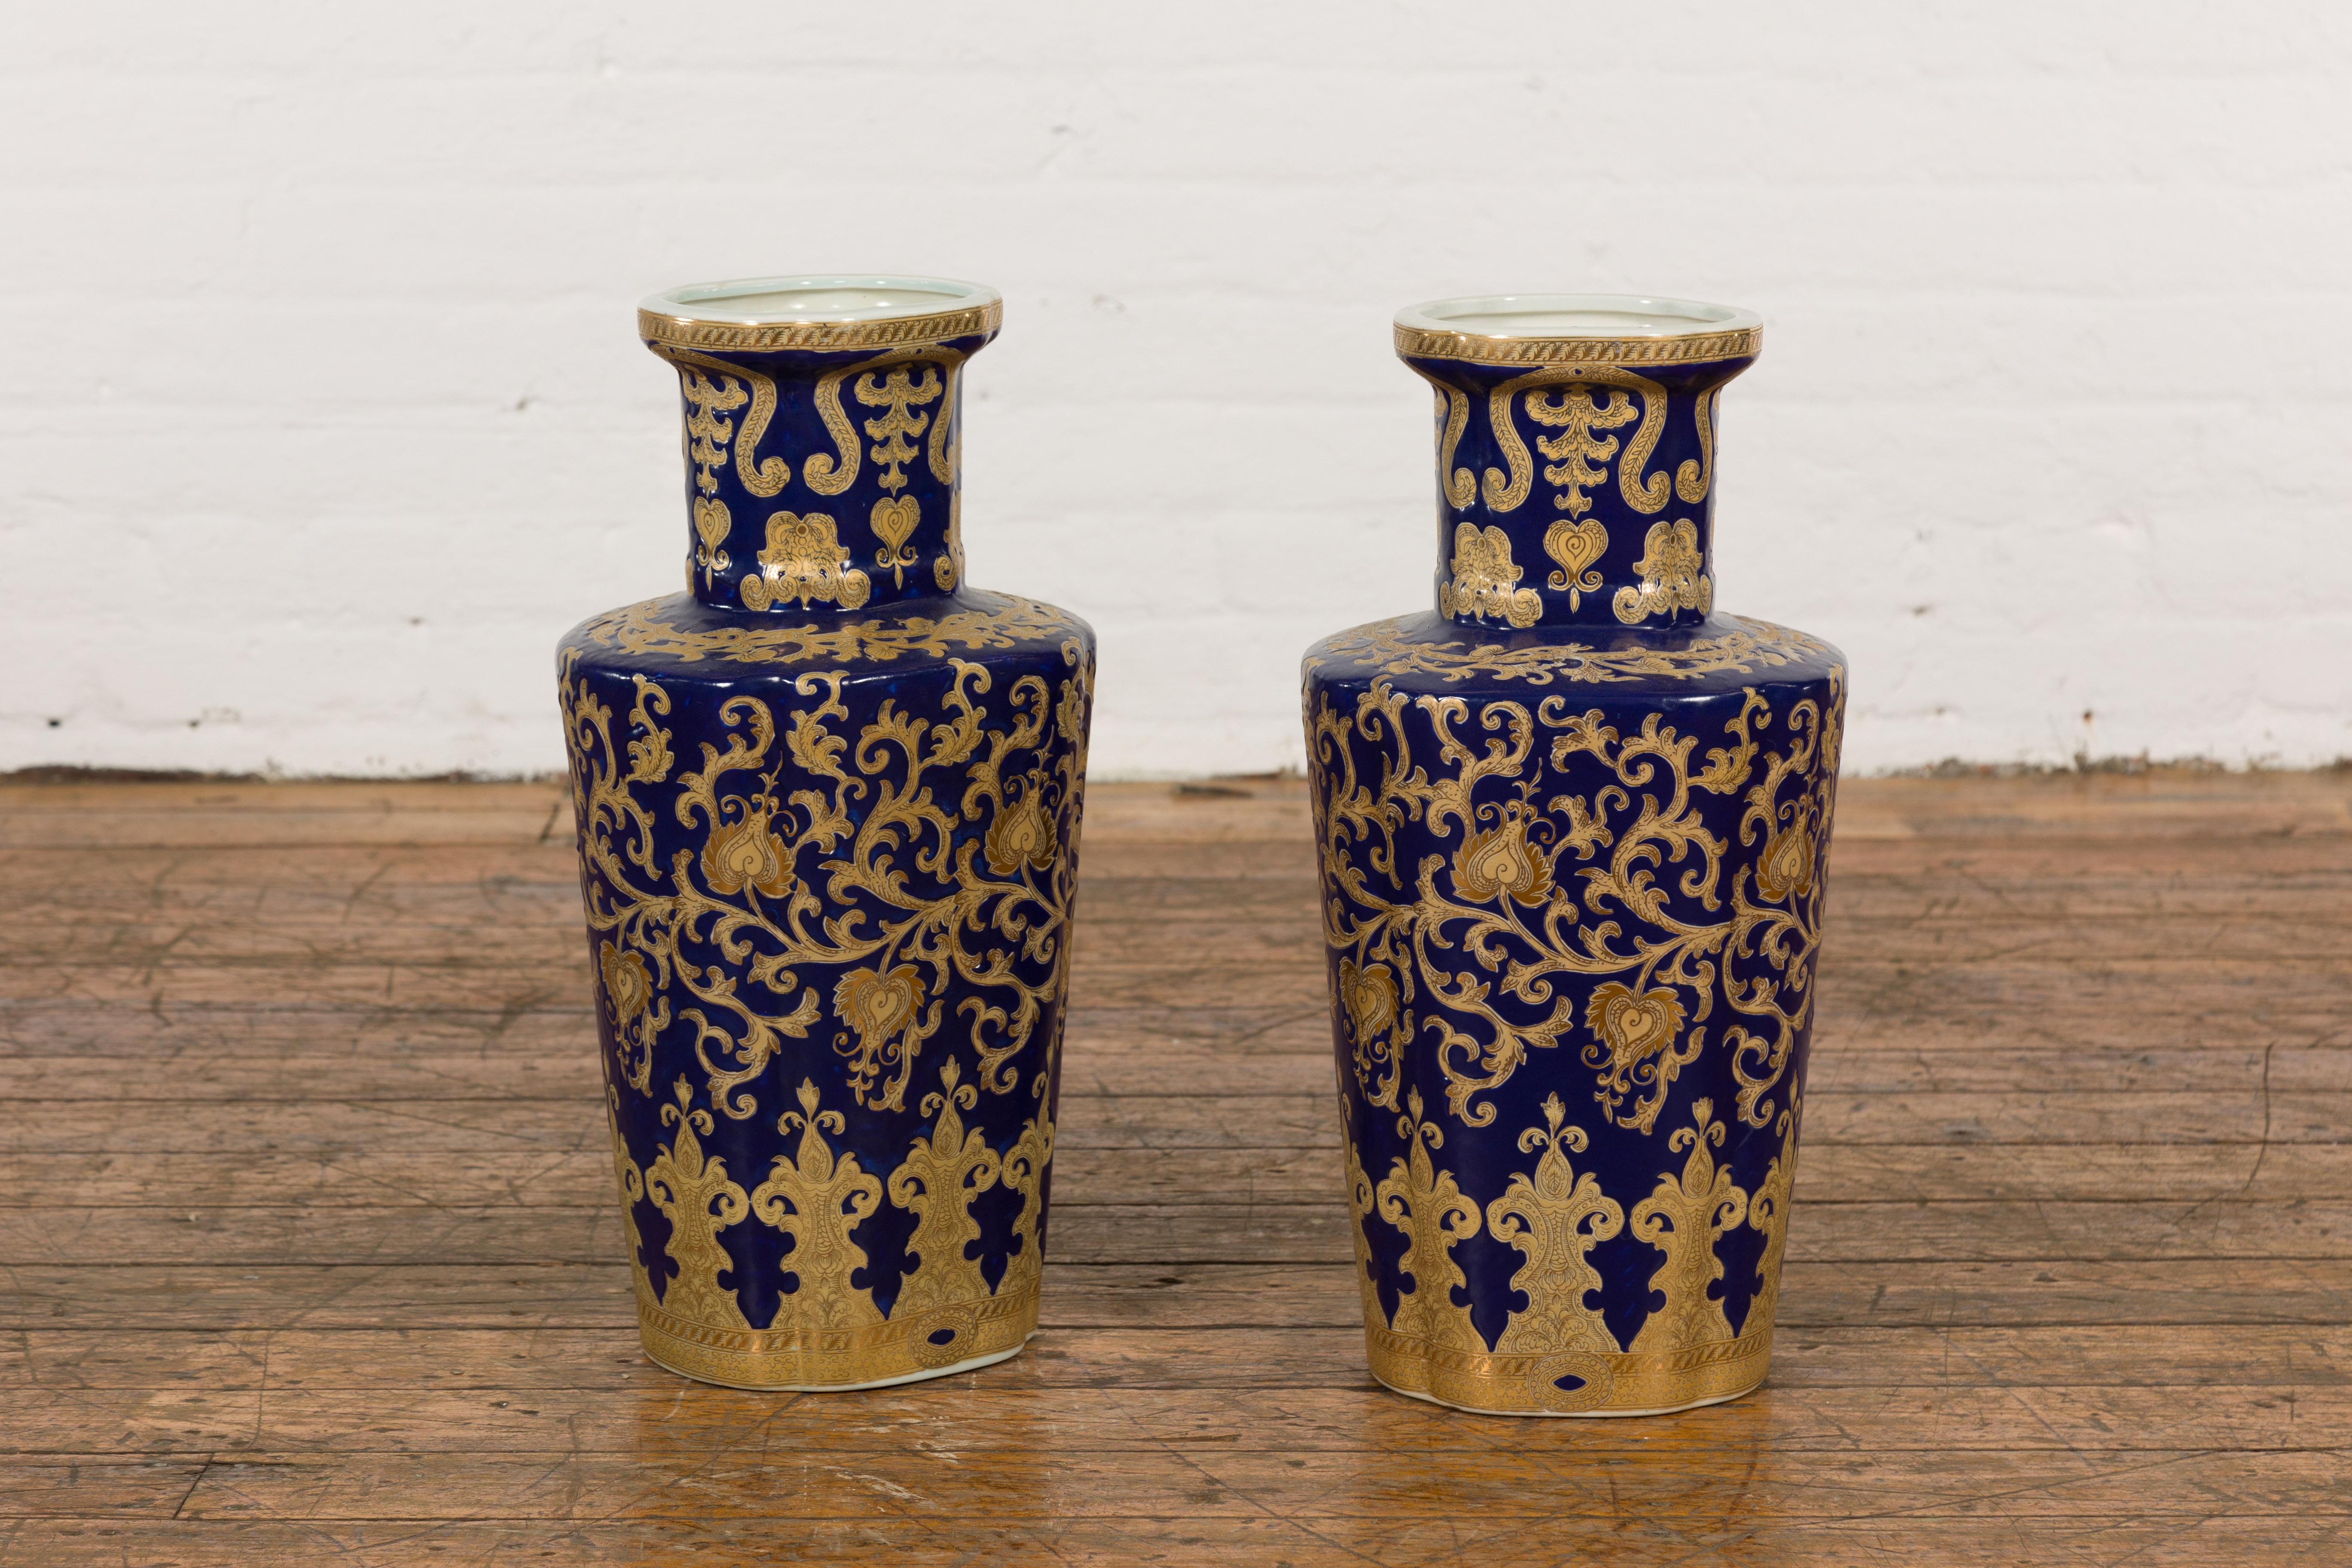 A pair of vintage Chinese cobalt blue and gold porcelain altar vases with scrolling foliage and heart motifs. Delight in the exquisite artistry of this pair of vintage Chinese altar vases, presenting a captivating dance of cobalt blue and gold.